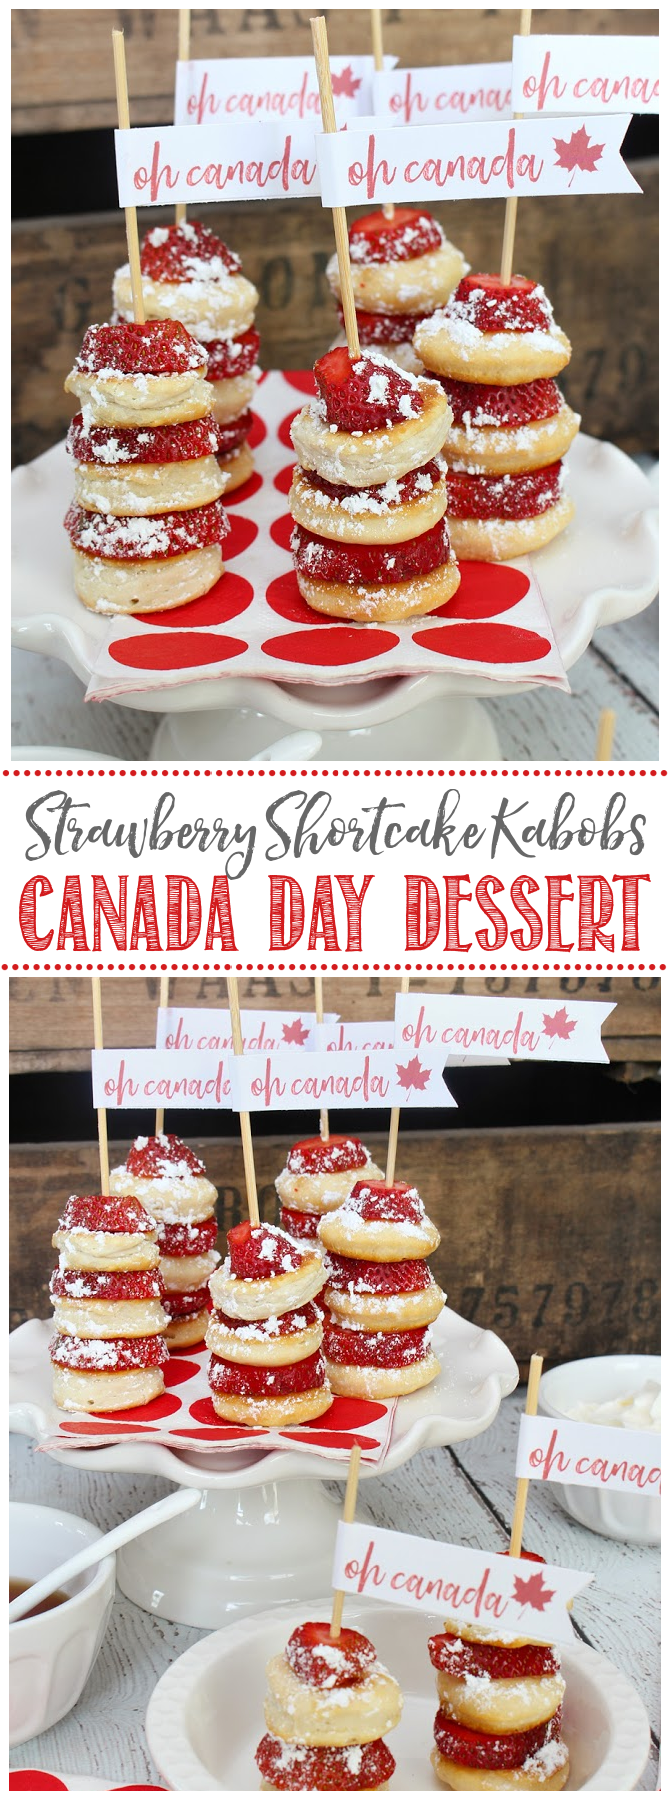 Strawberry shortcake kabobs on a cake stand with Oh Canada treat toppers.